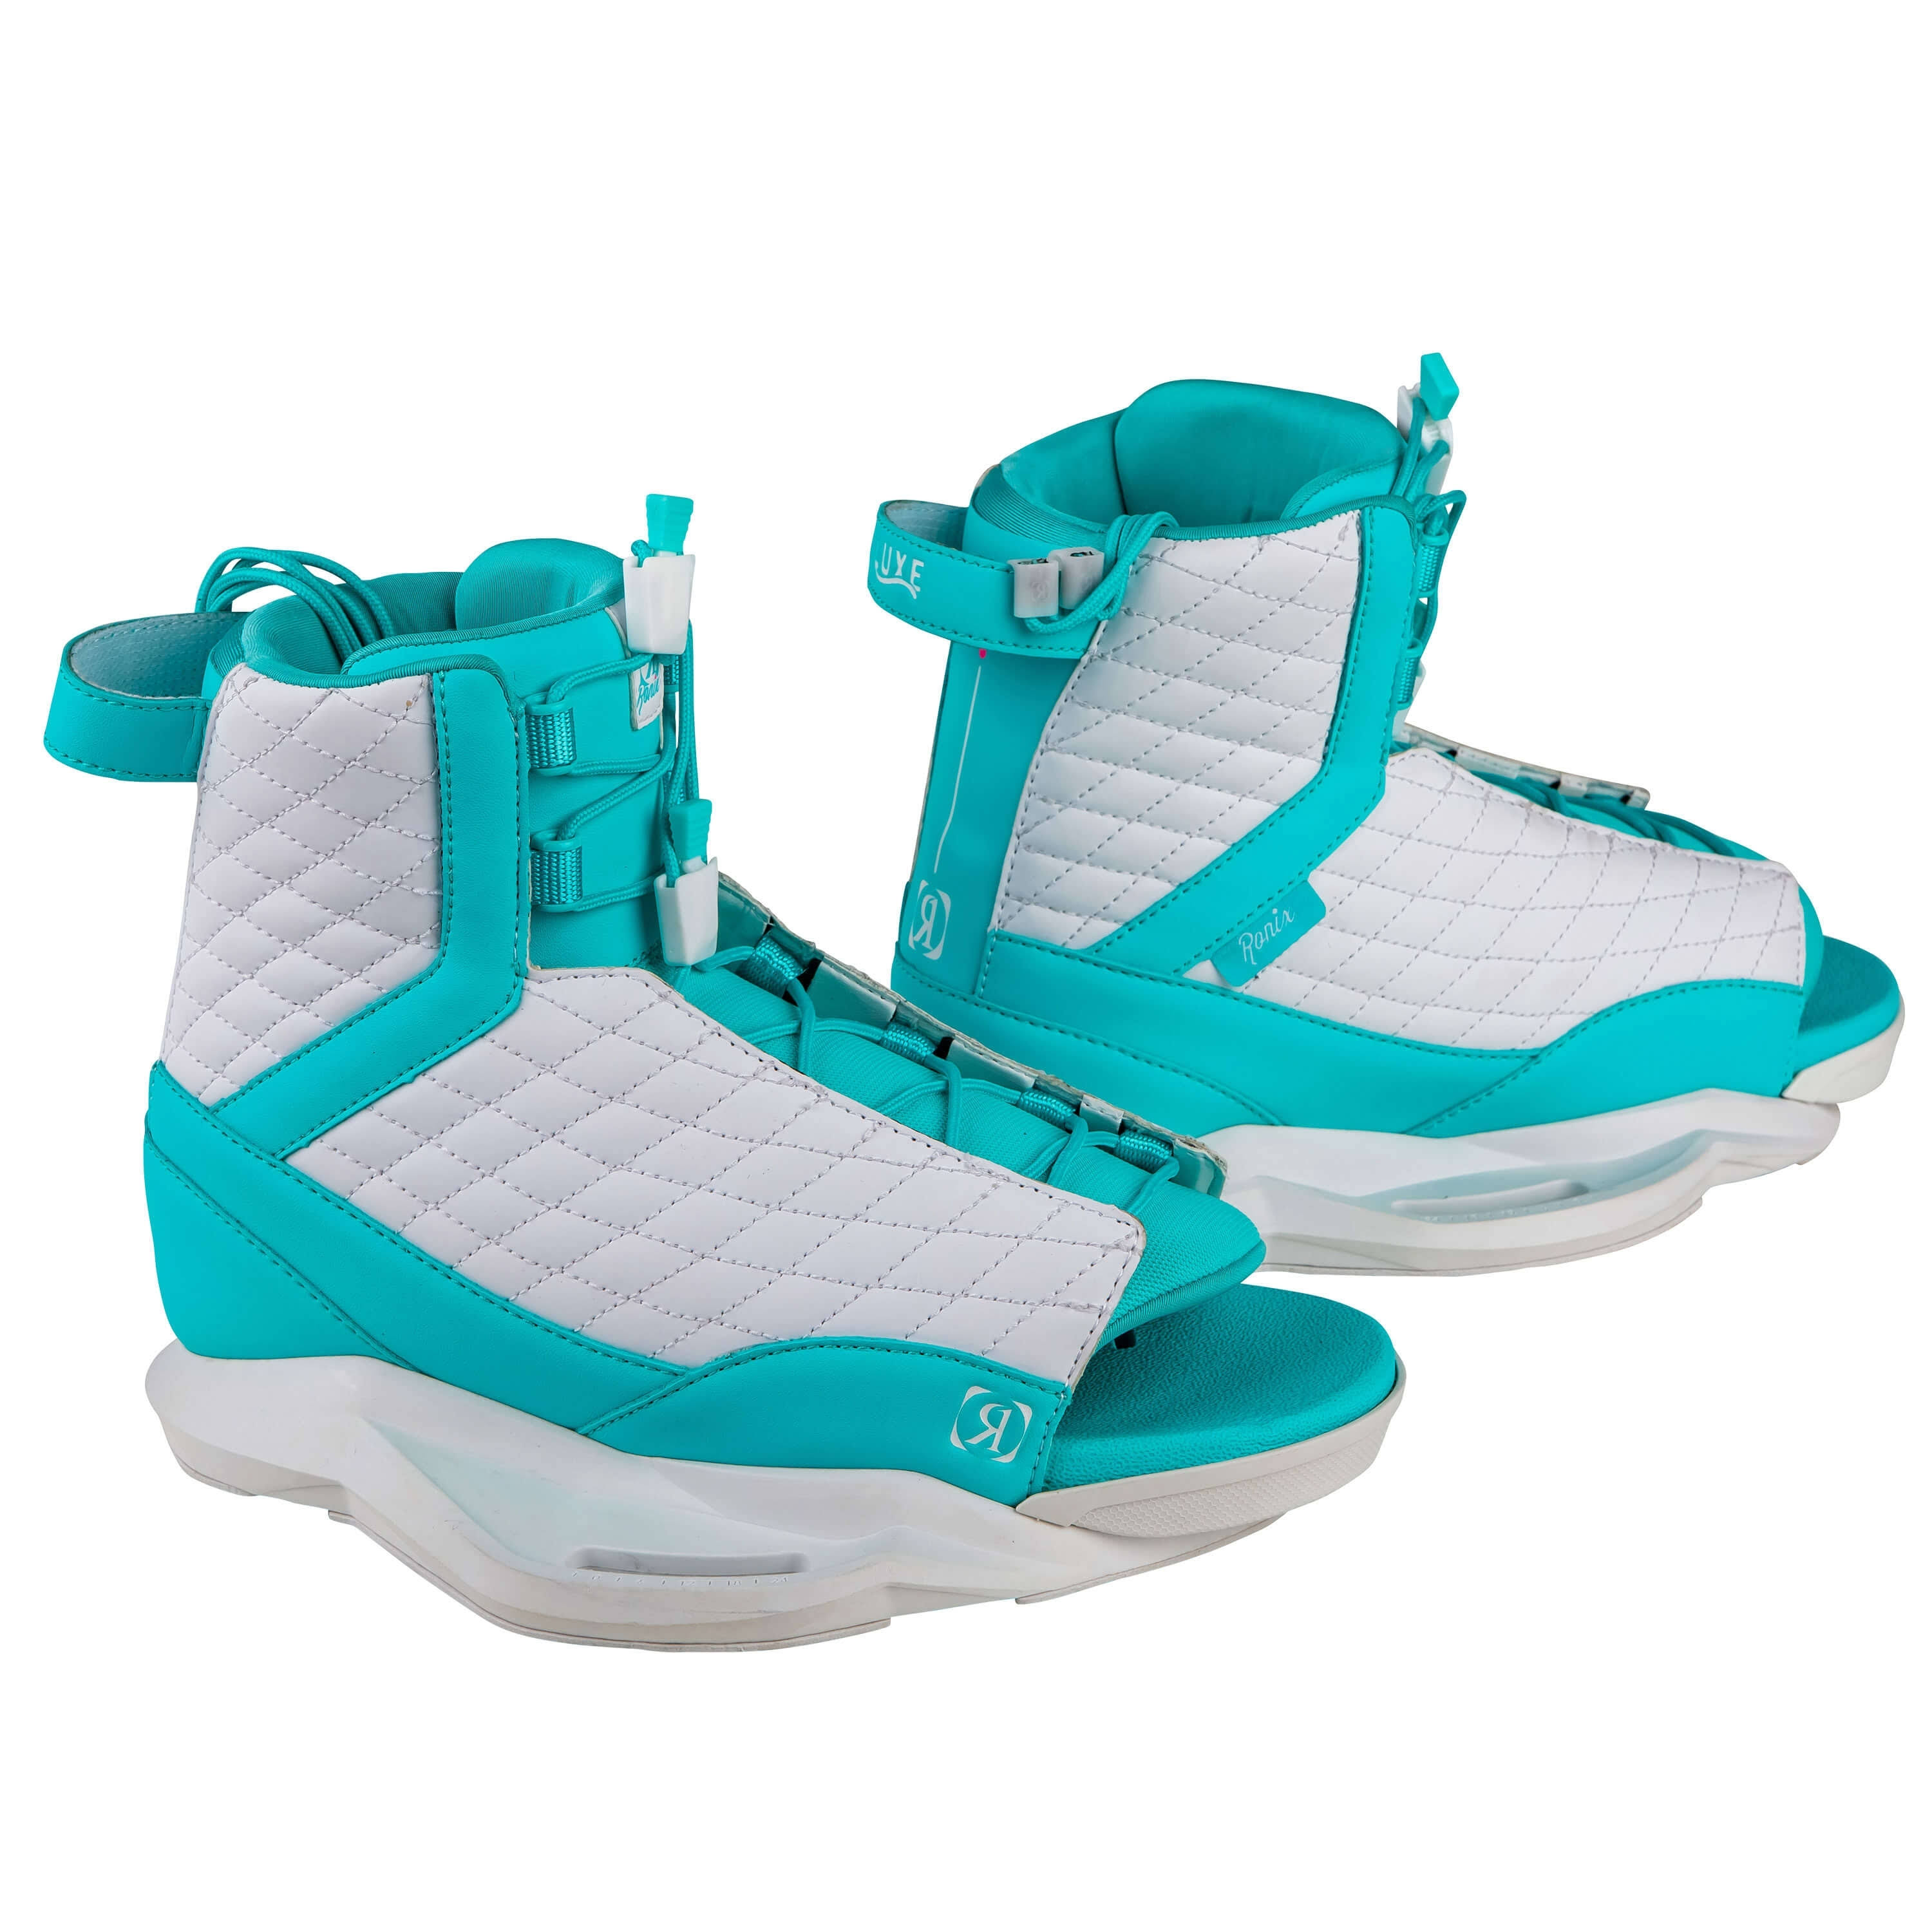 Ronix Luxe Women's Wakeboard Boots 2021 - 8-10.5